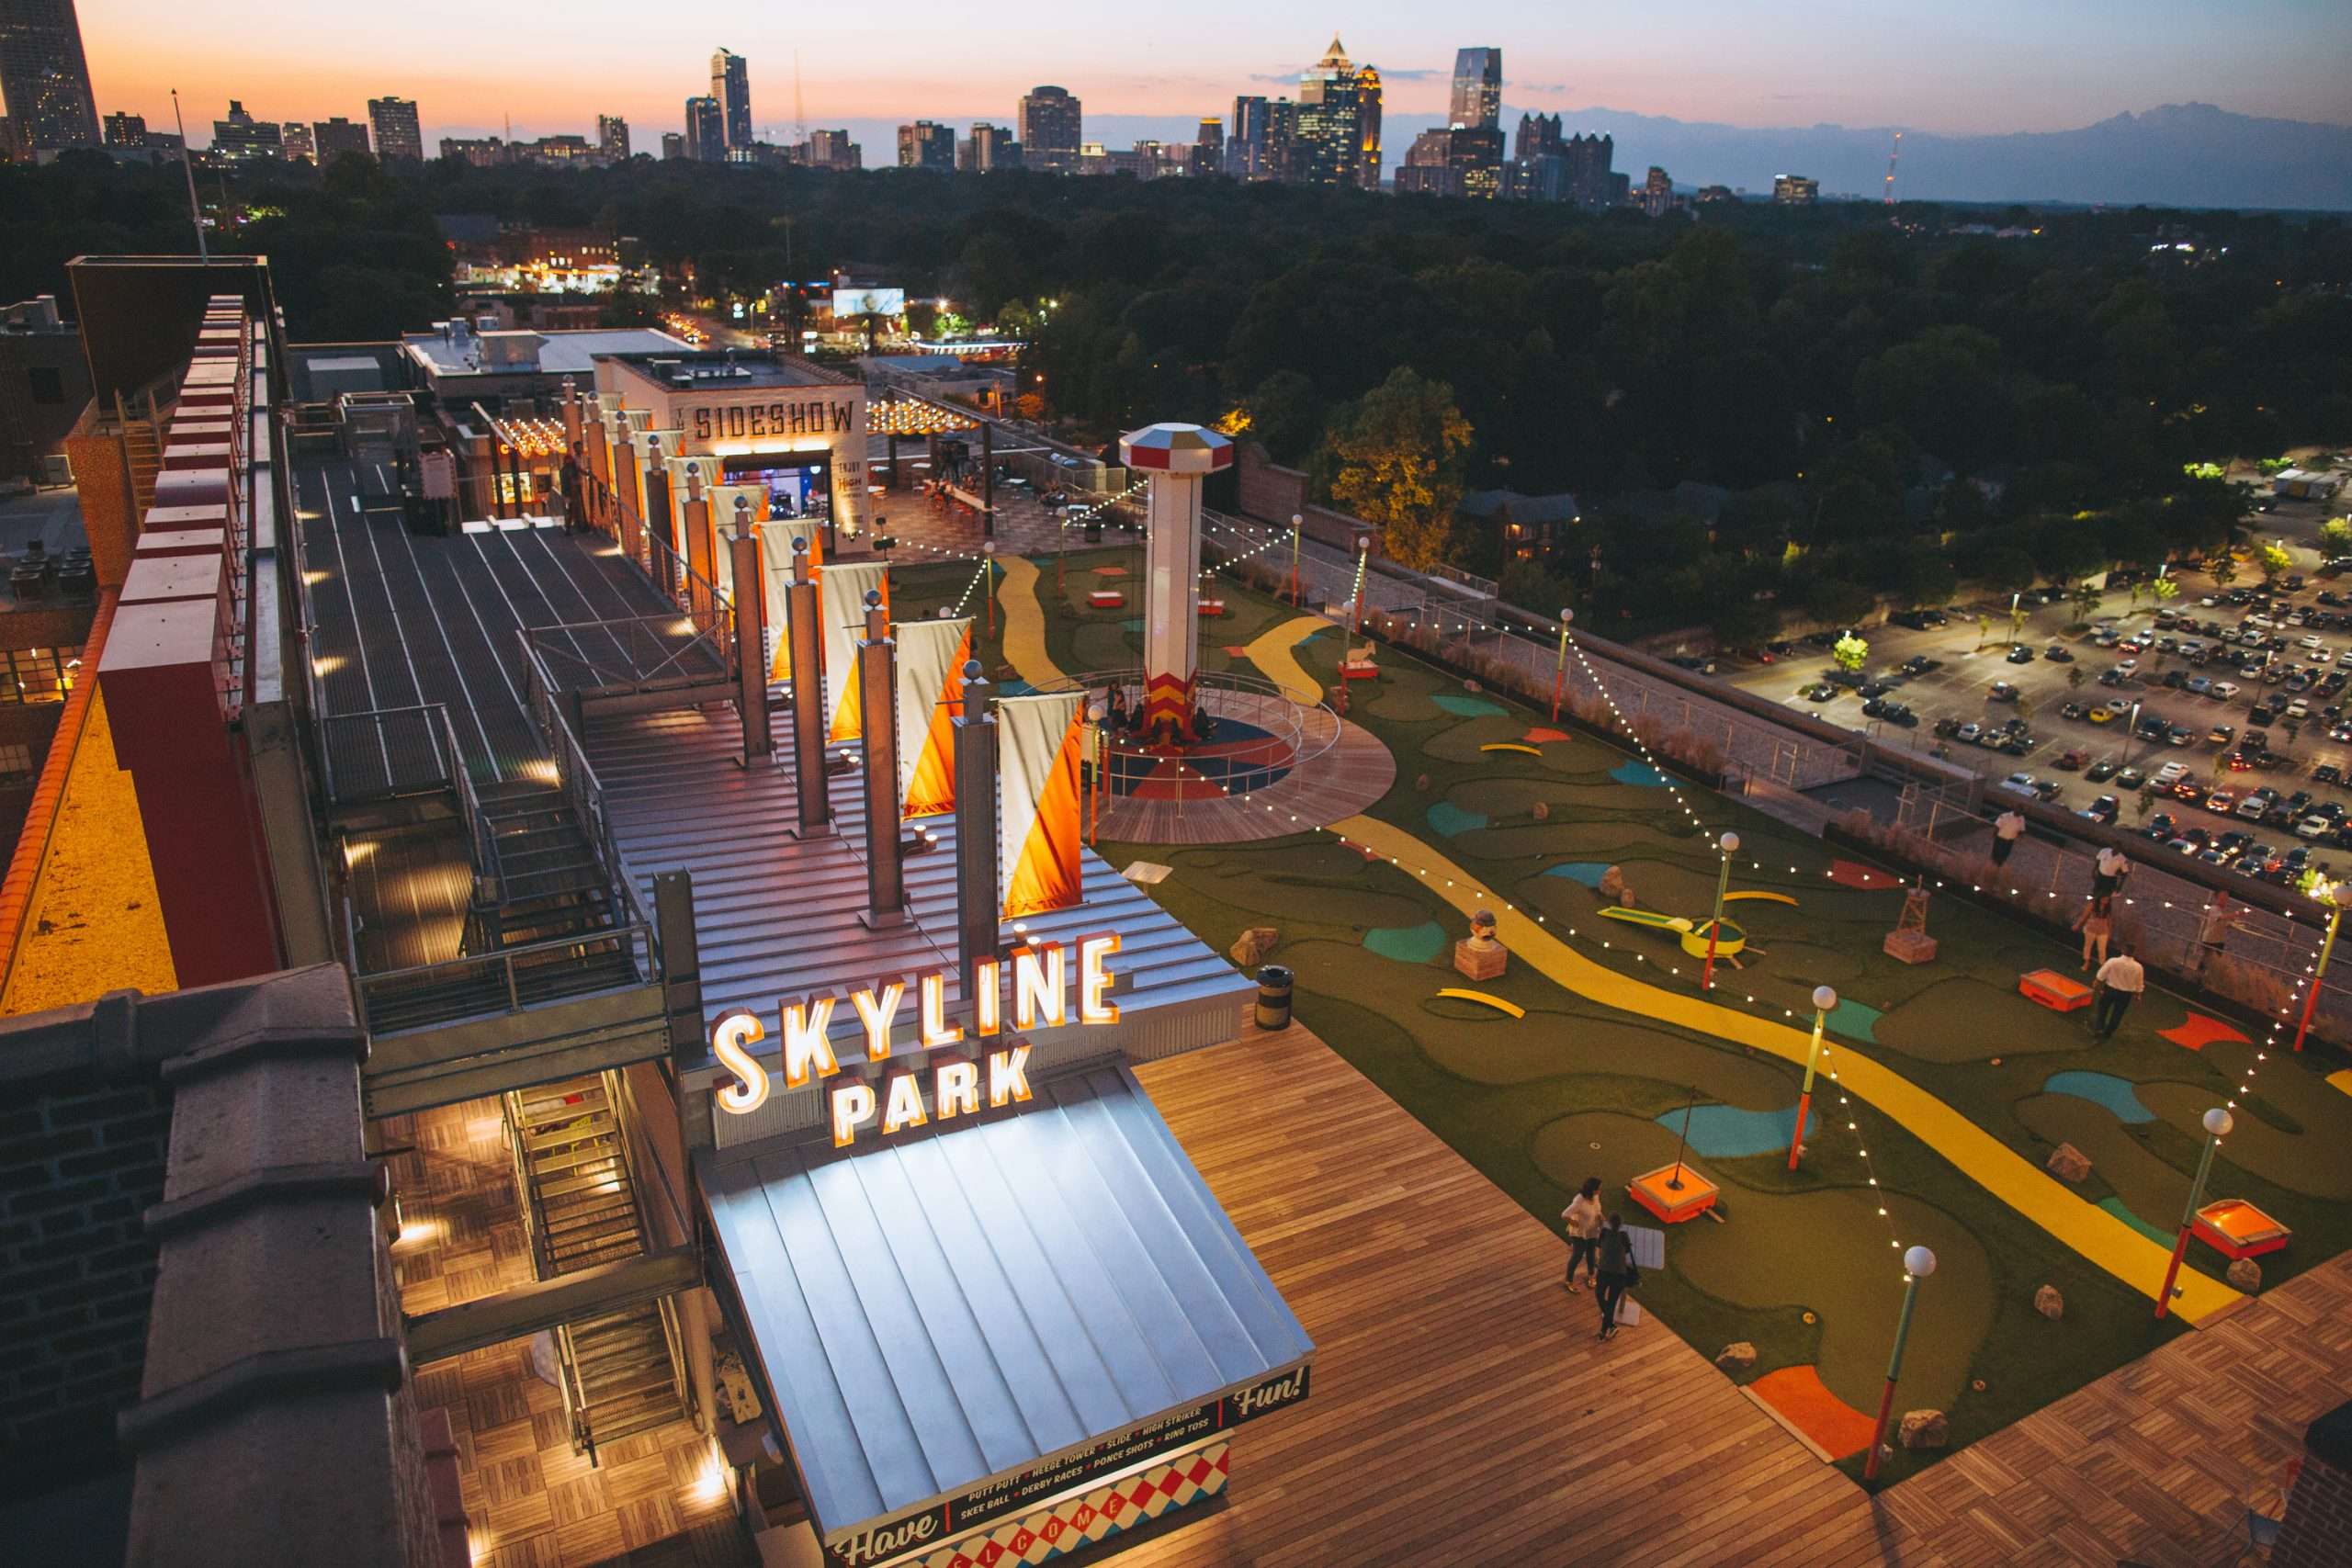 15 Best Things to Do with Kids in Atlanta for Non